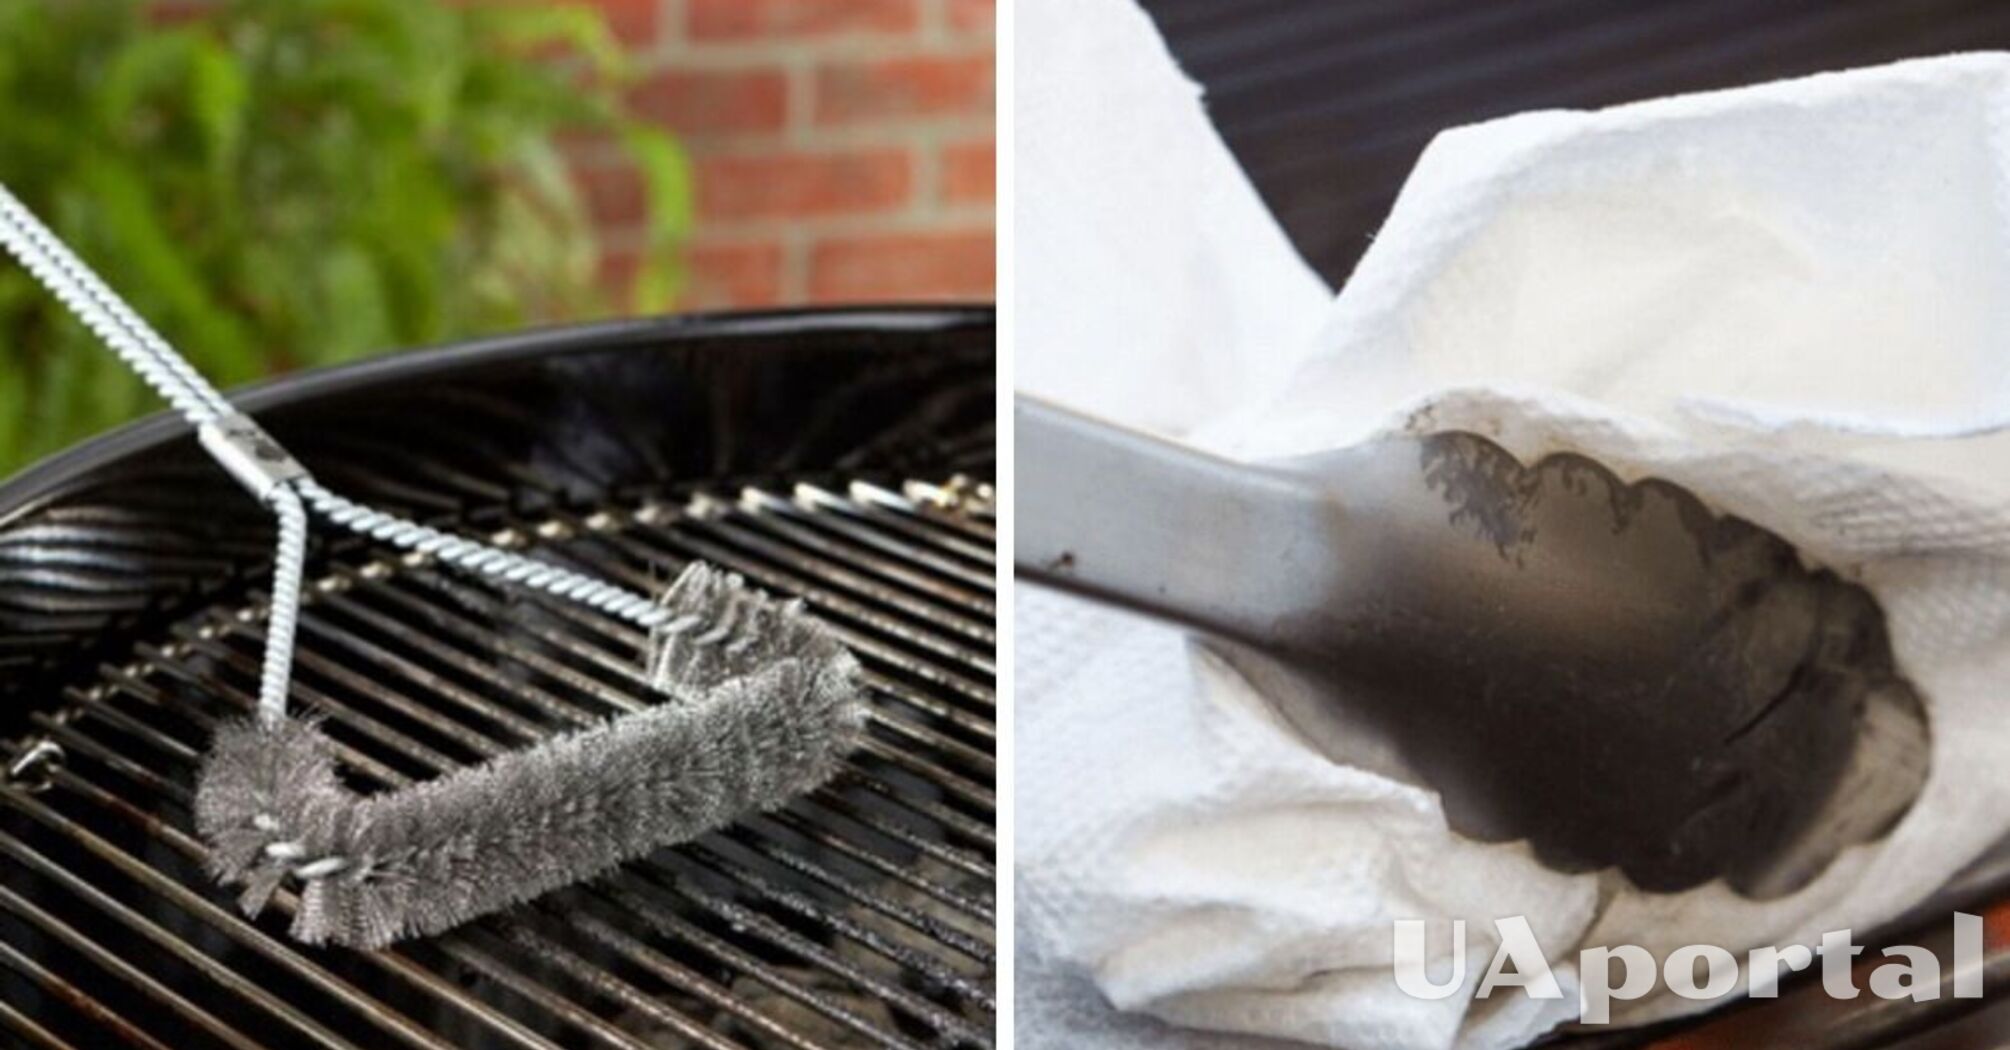 How to clean a fat grill from soot: a simple life hack